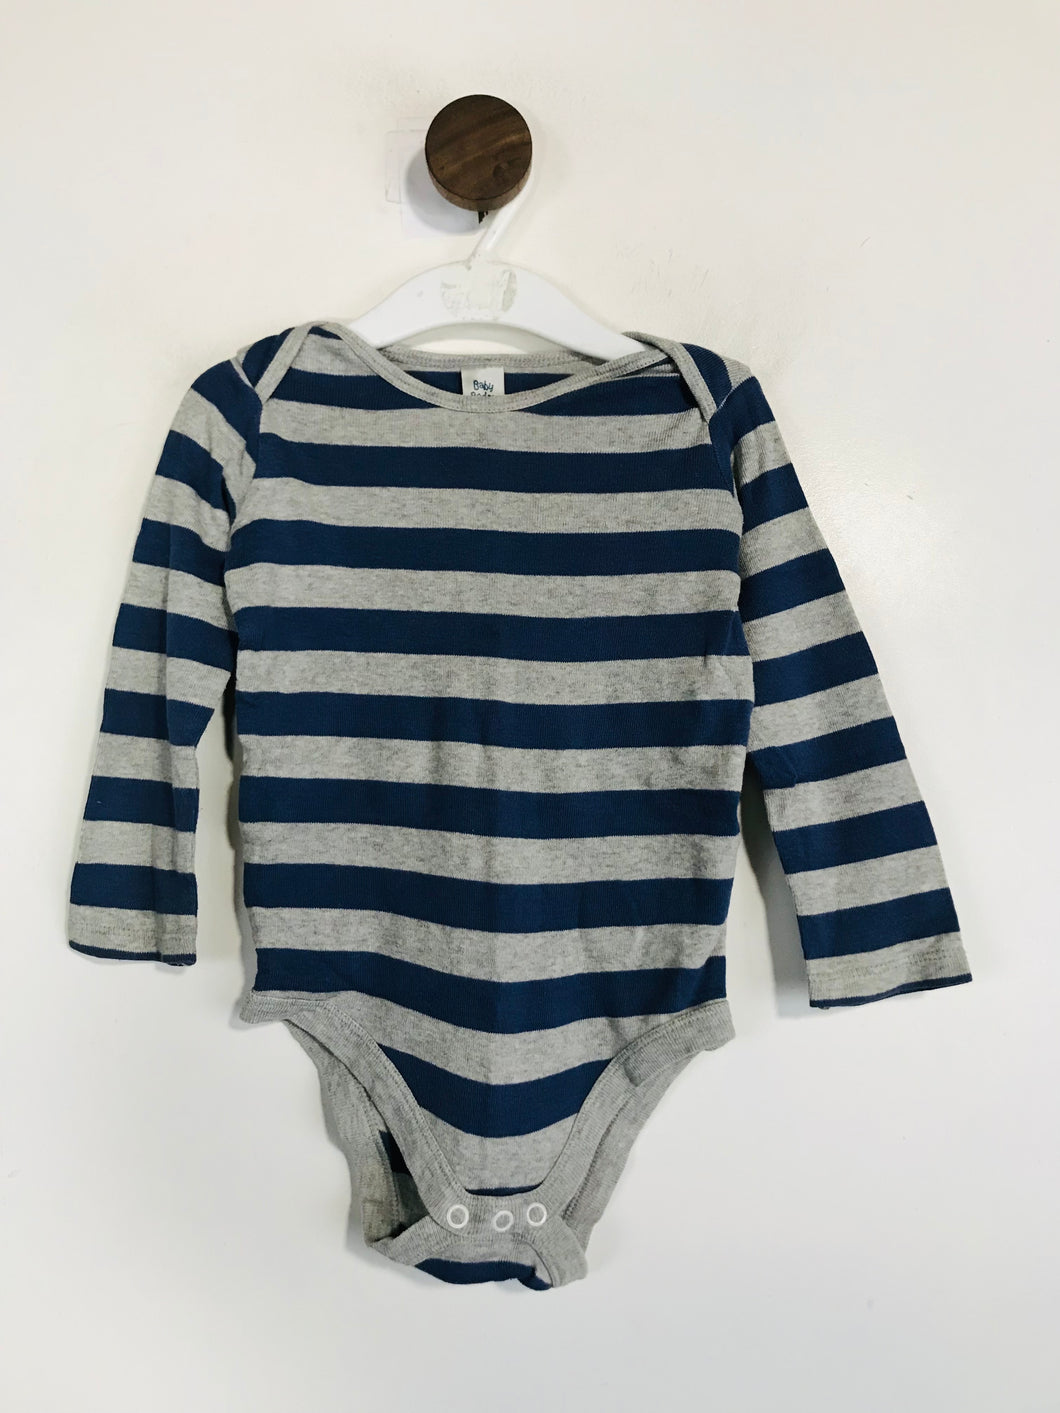 Baby Boden Kid's Striped Babygrow Playsuit | 18-24 Months | Blue